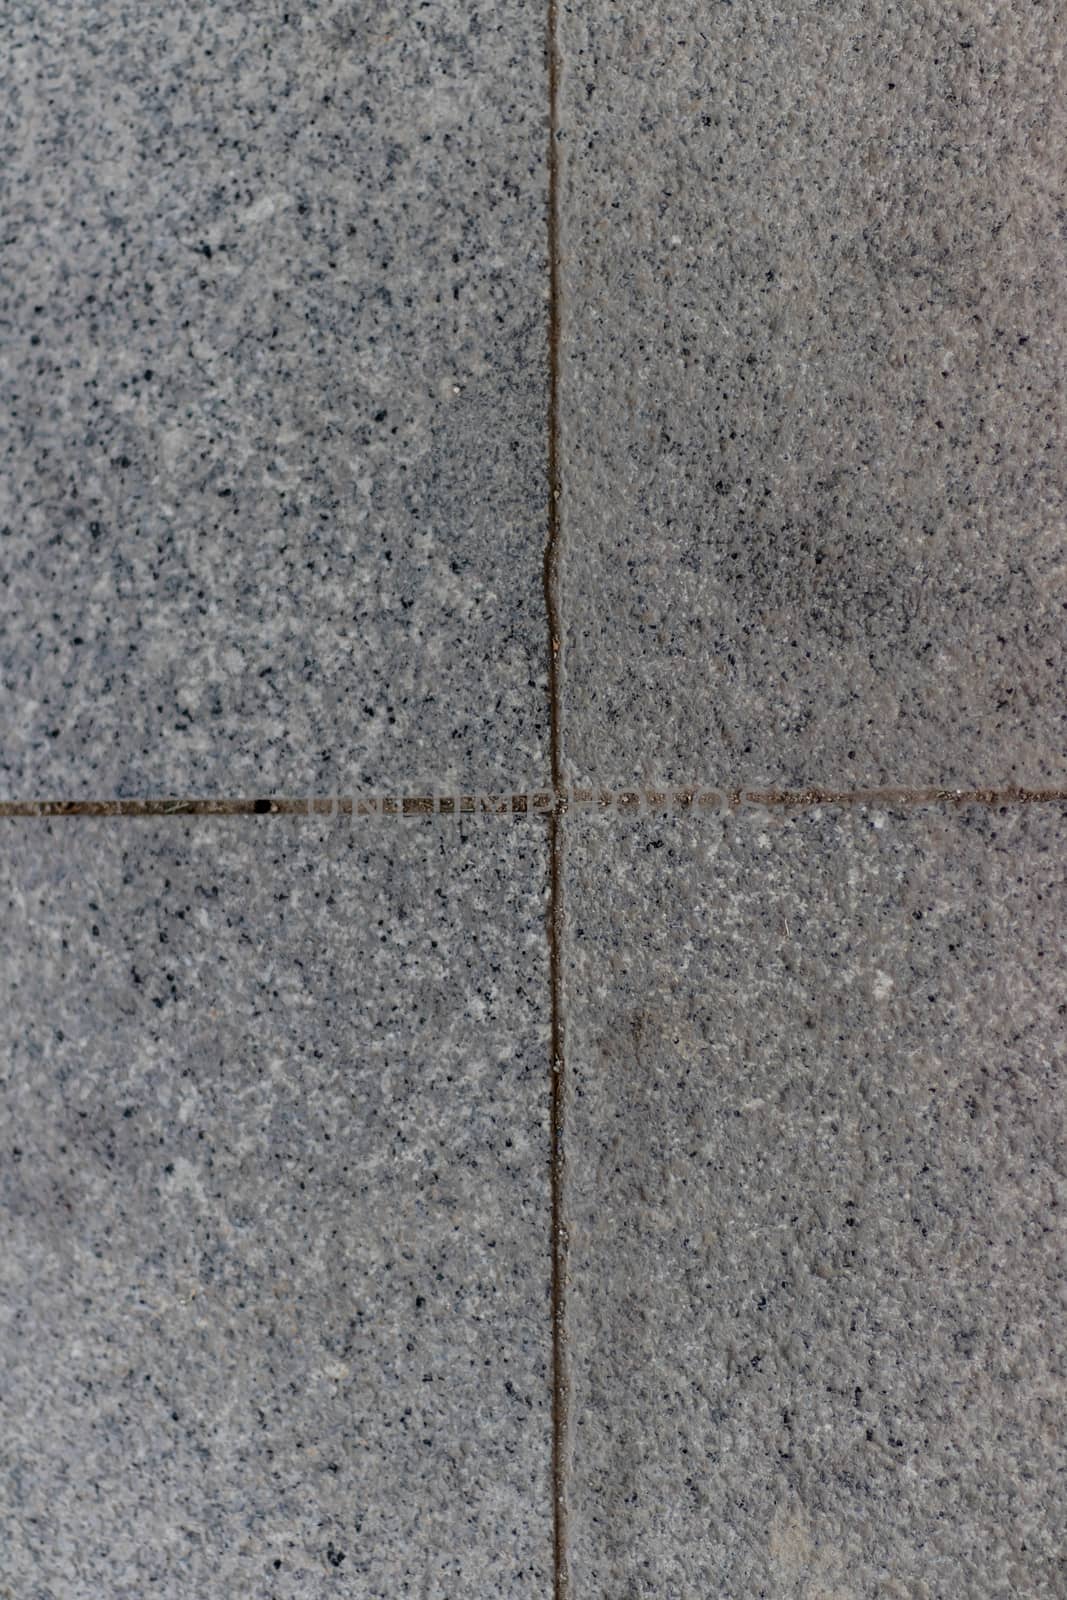 gray pointy and dirty pavement stone square parts centered with good composition. photo has taken from izmir/turkey.